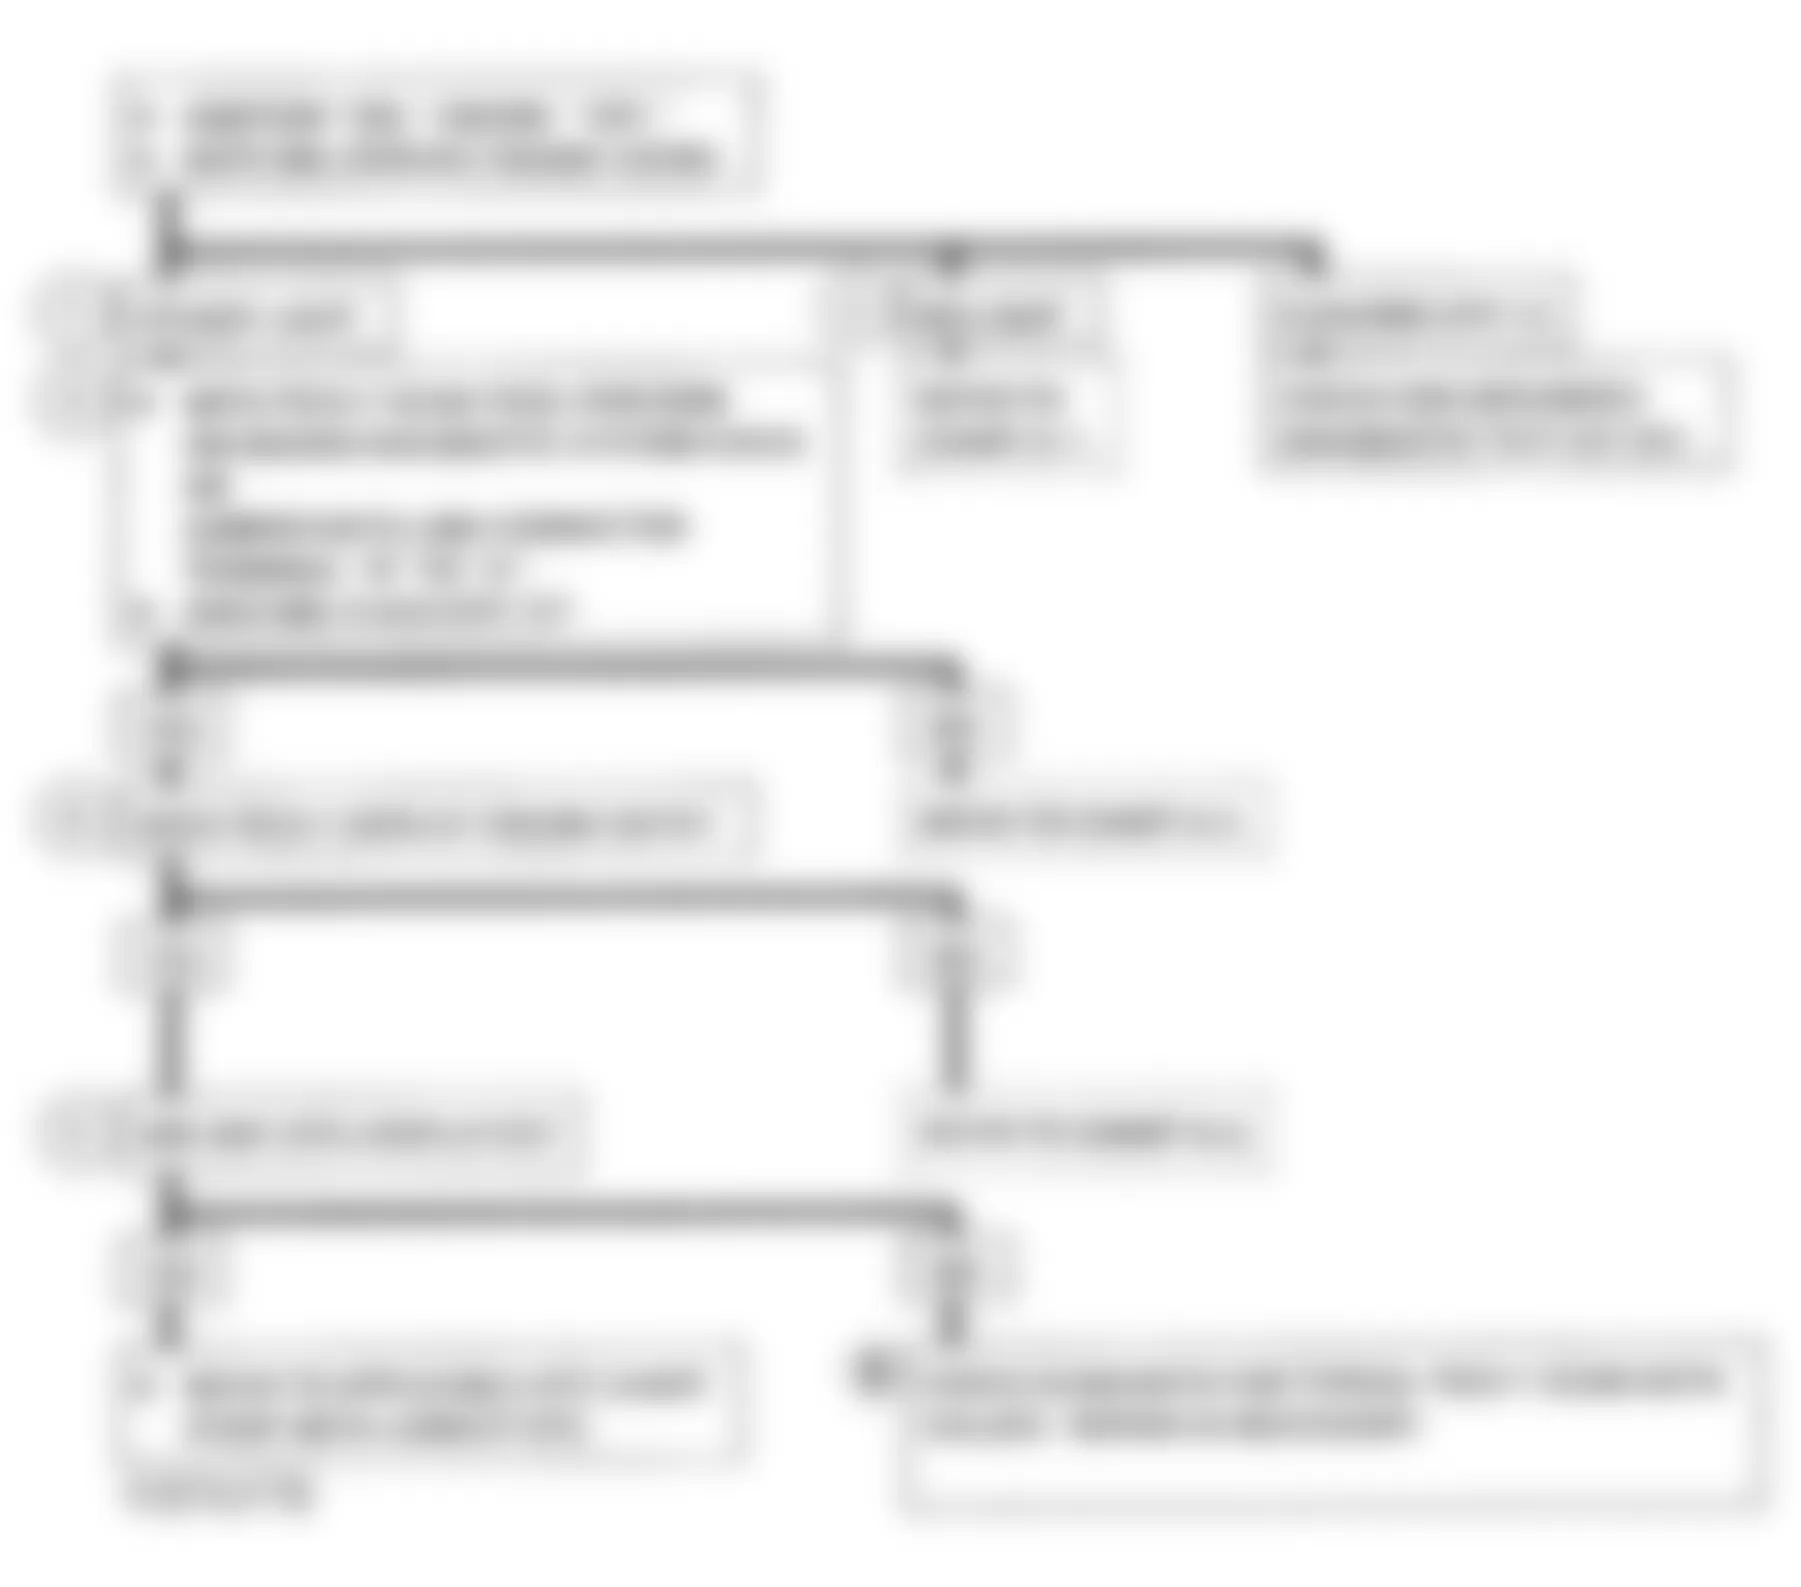 GMC Suburban C2500 1993 - Component Locations -  Flowchart, System Check A/T